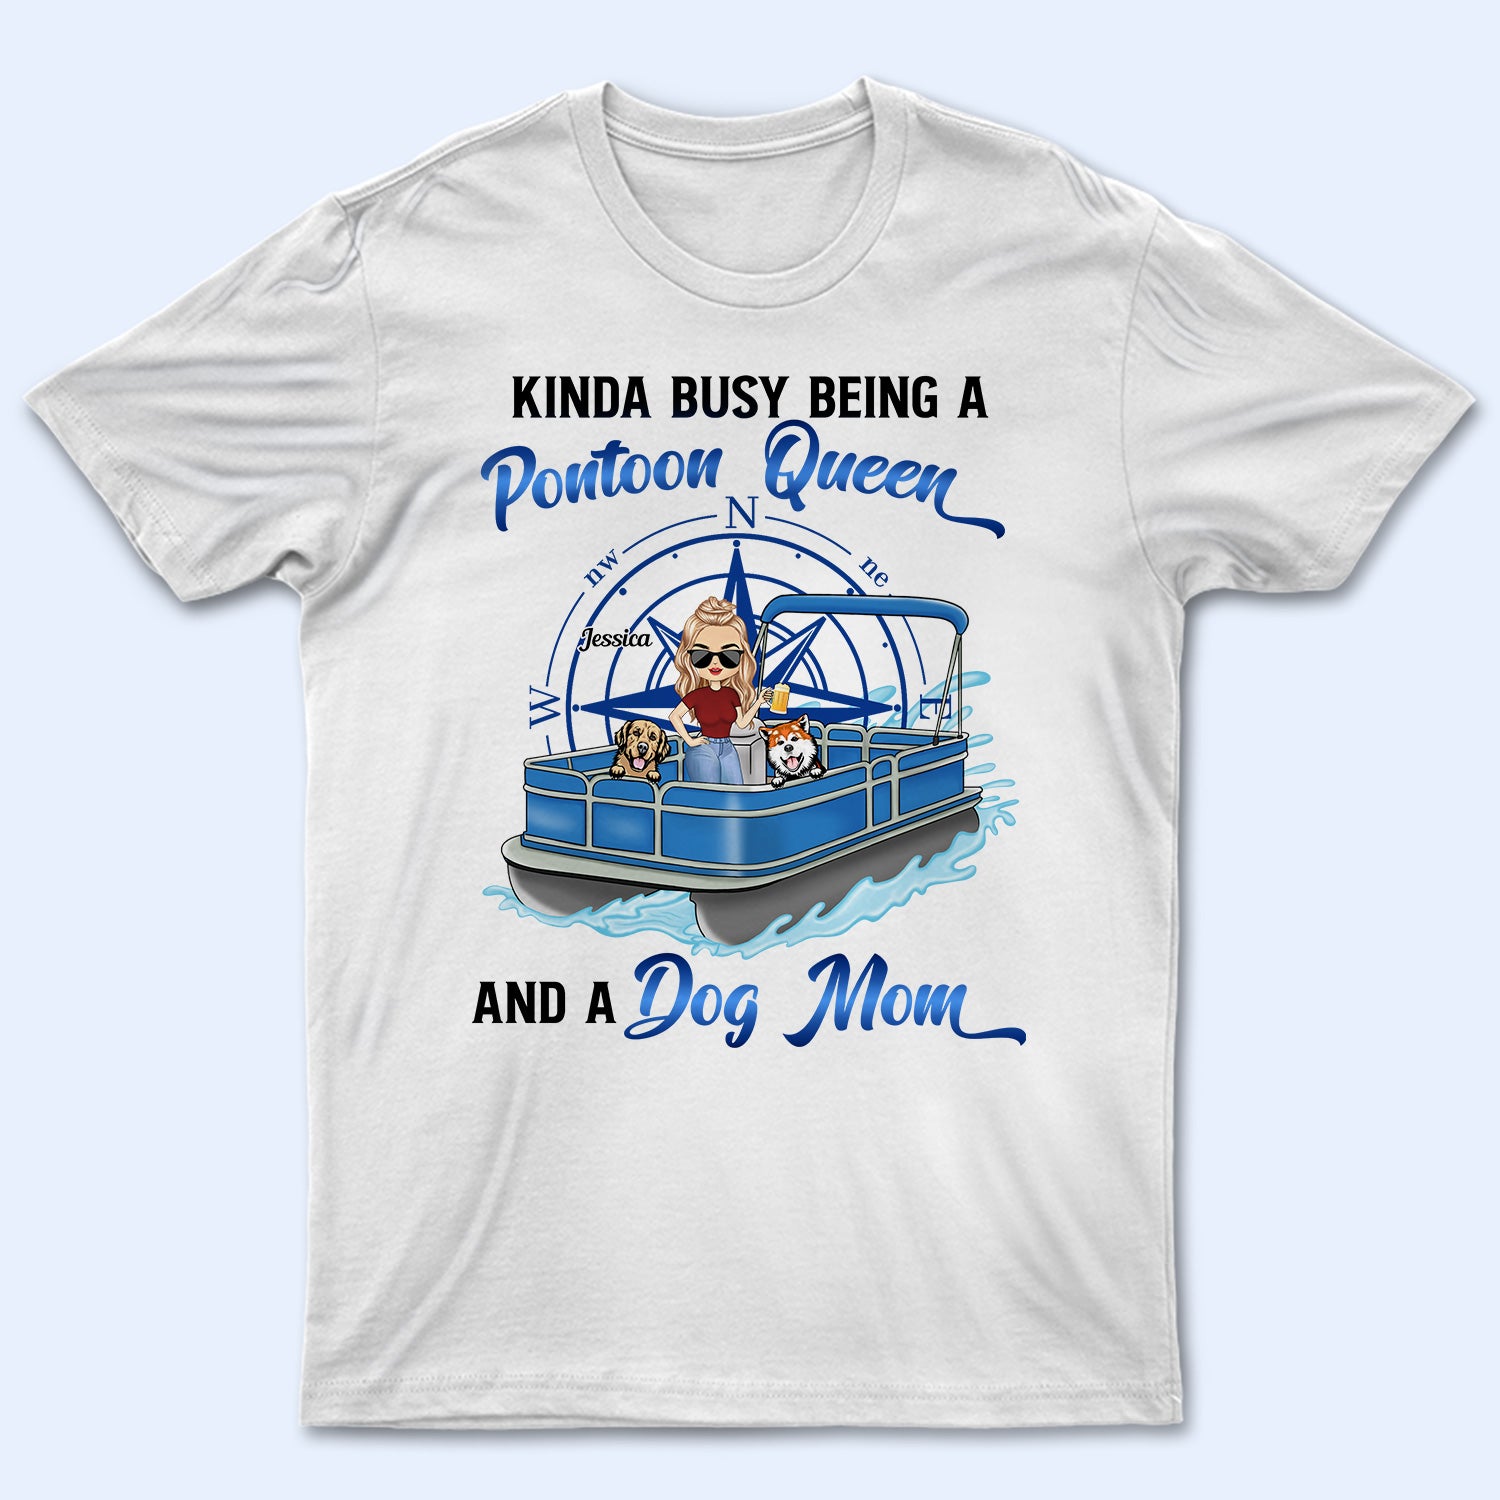 Kinda Busy Being A Pontoon Queen & A Dog Mom - Gift For Pet Lovers, Pontooning Lovers, Lake Lovers, Travelers - Personalized Custom T Shirt